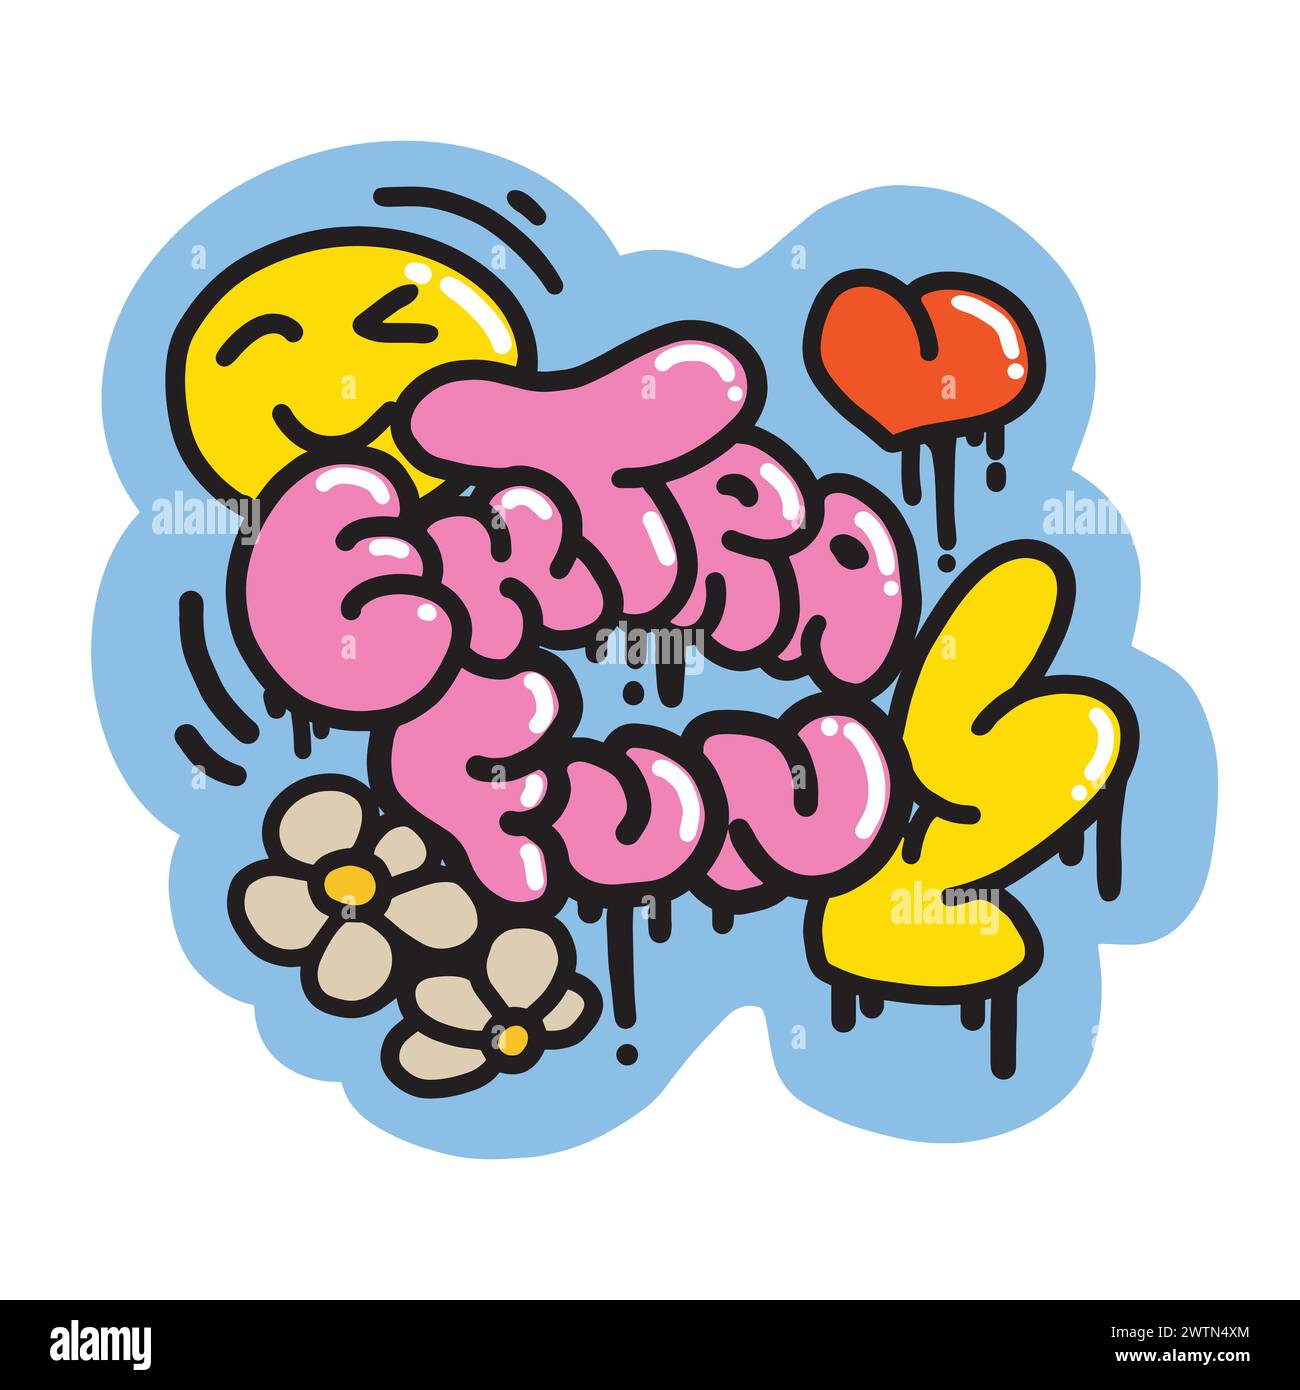 Graffiti Slogan Extra Fun with Cartoon Heart, Lightning, Daisies, Smile. Colorful Urban style Lettering. Vector illustration. Hippie Sticker for T-Shirts, Wallpaper, Case Phone. Stock Vector